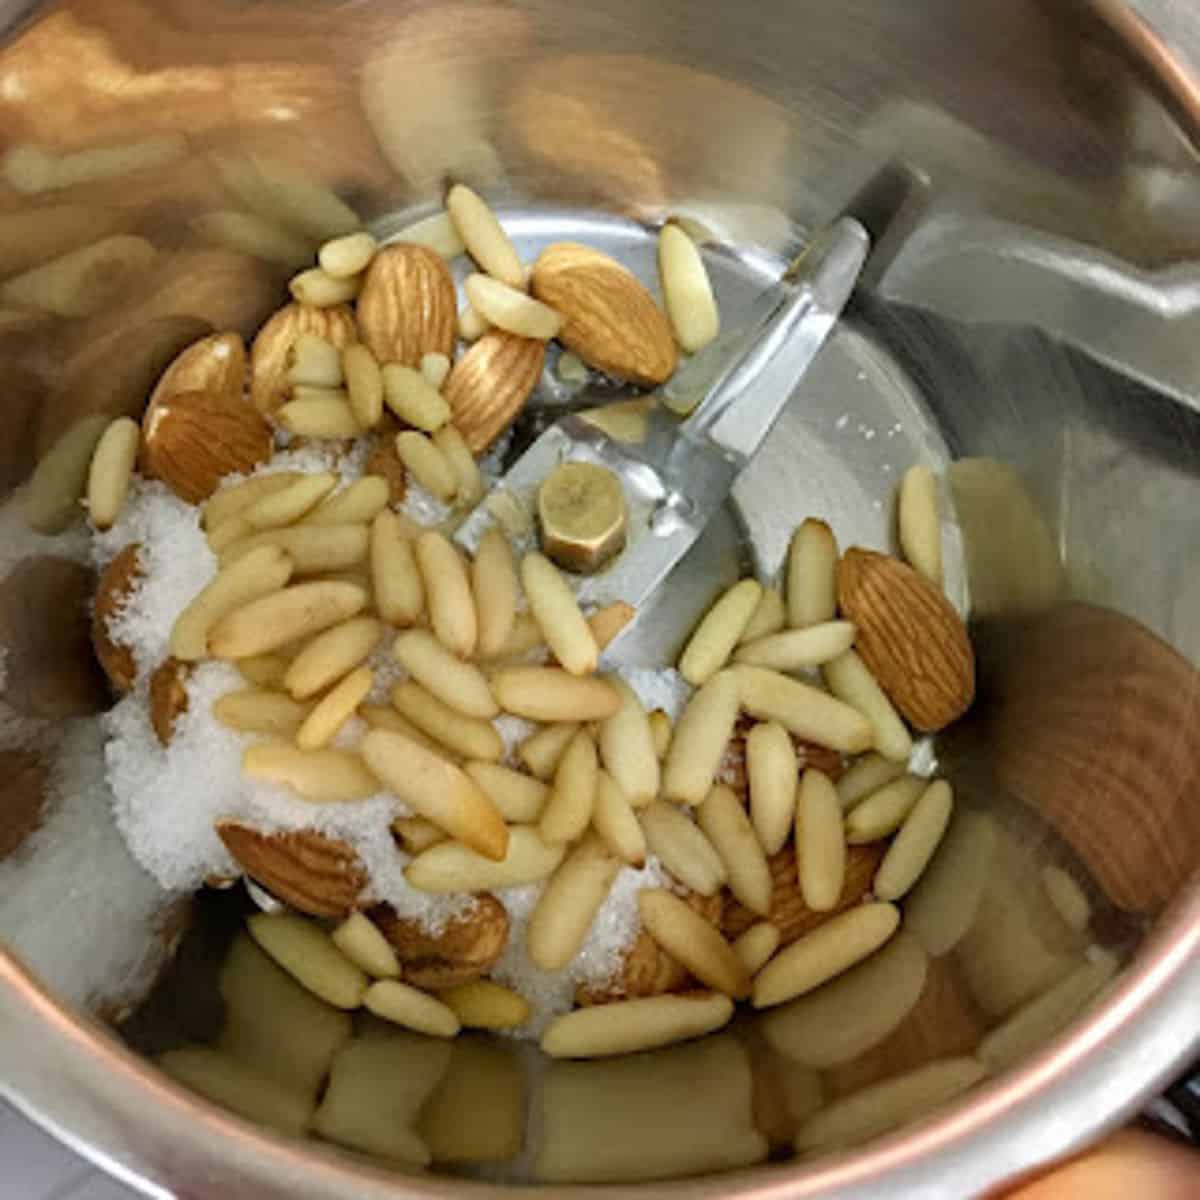 almonds and pine buts in a processer